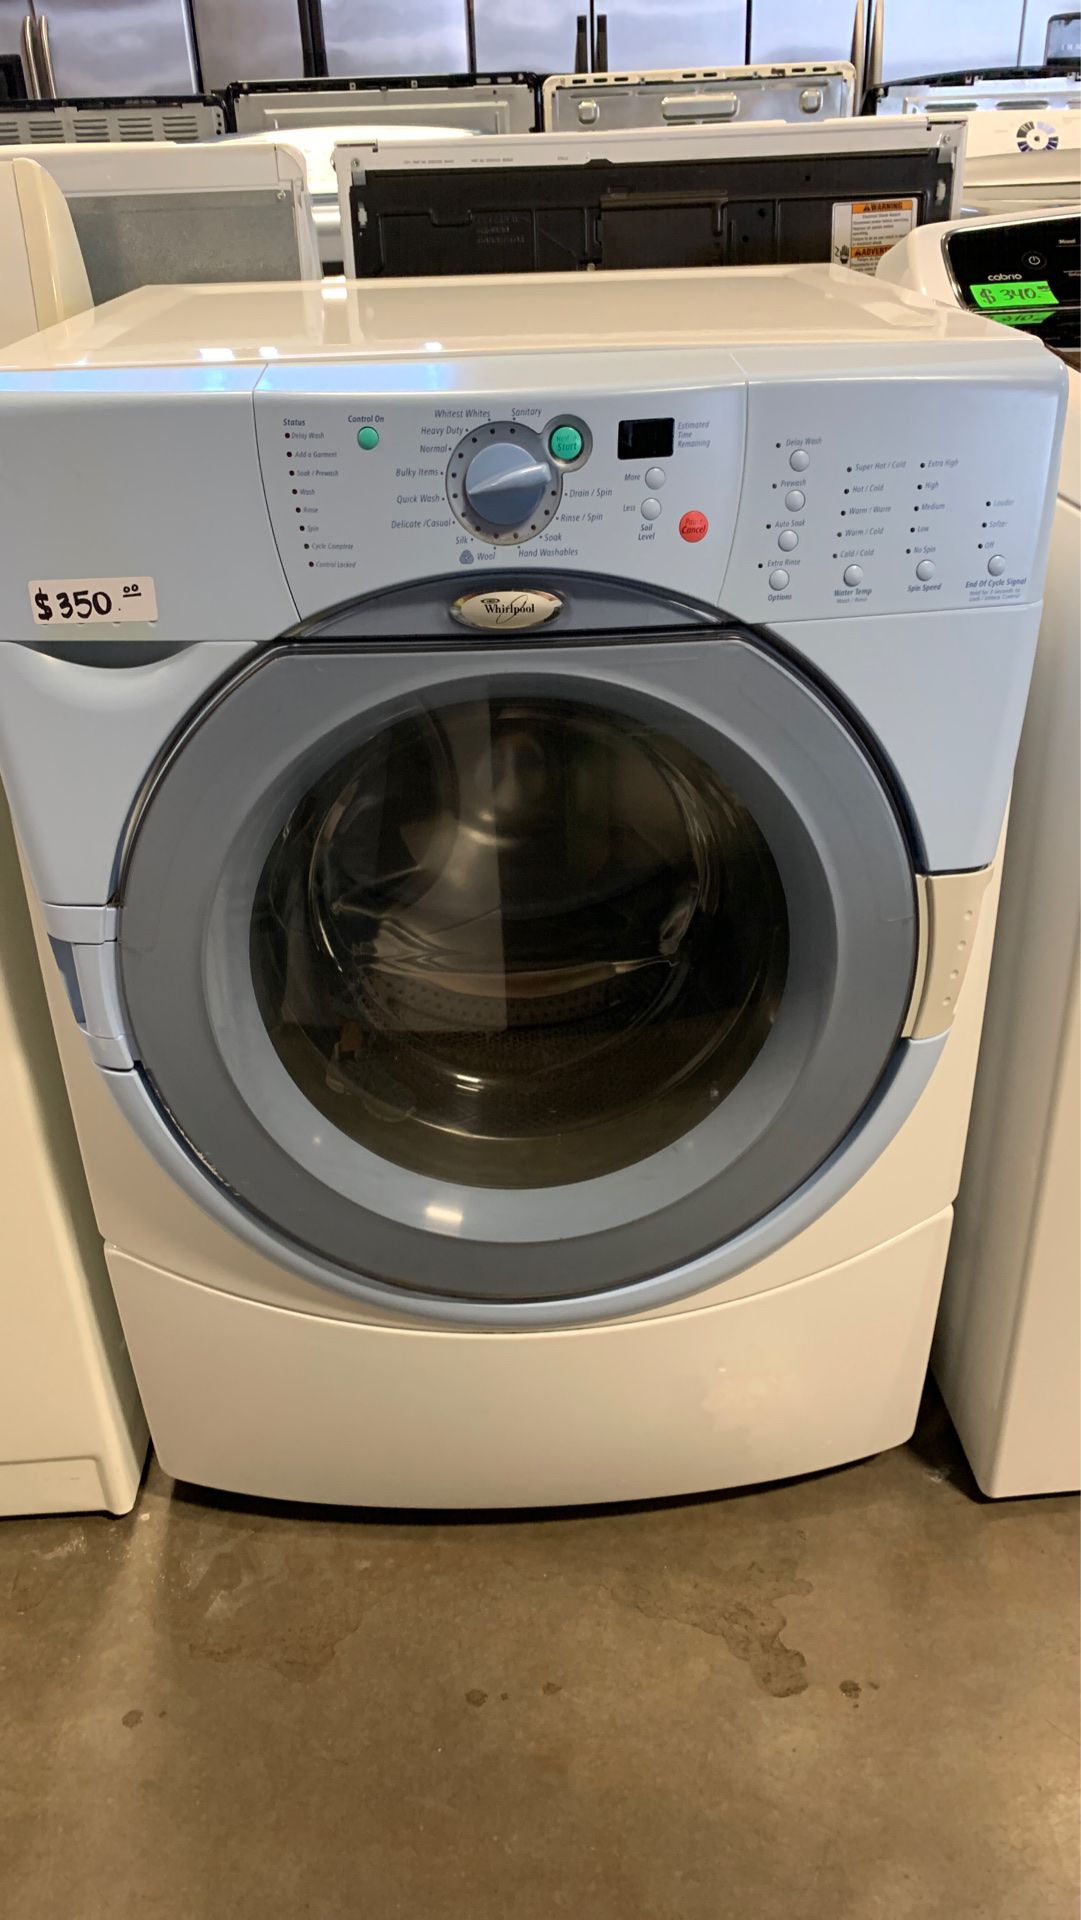 🔶Whirlpool duet front load Washer 🔶